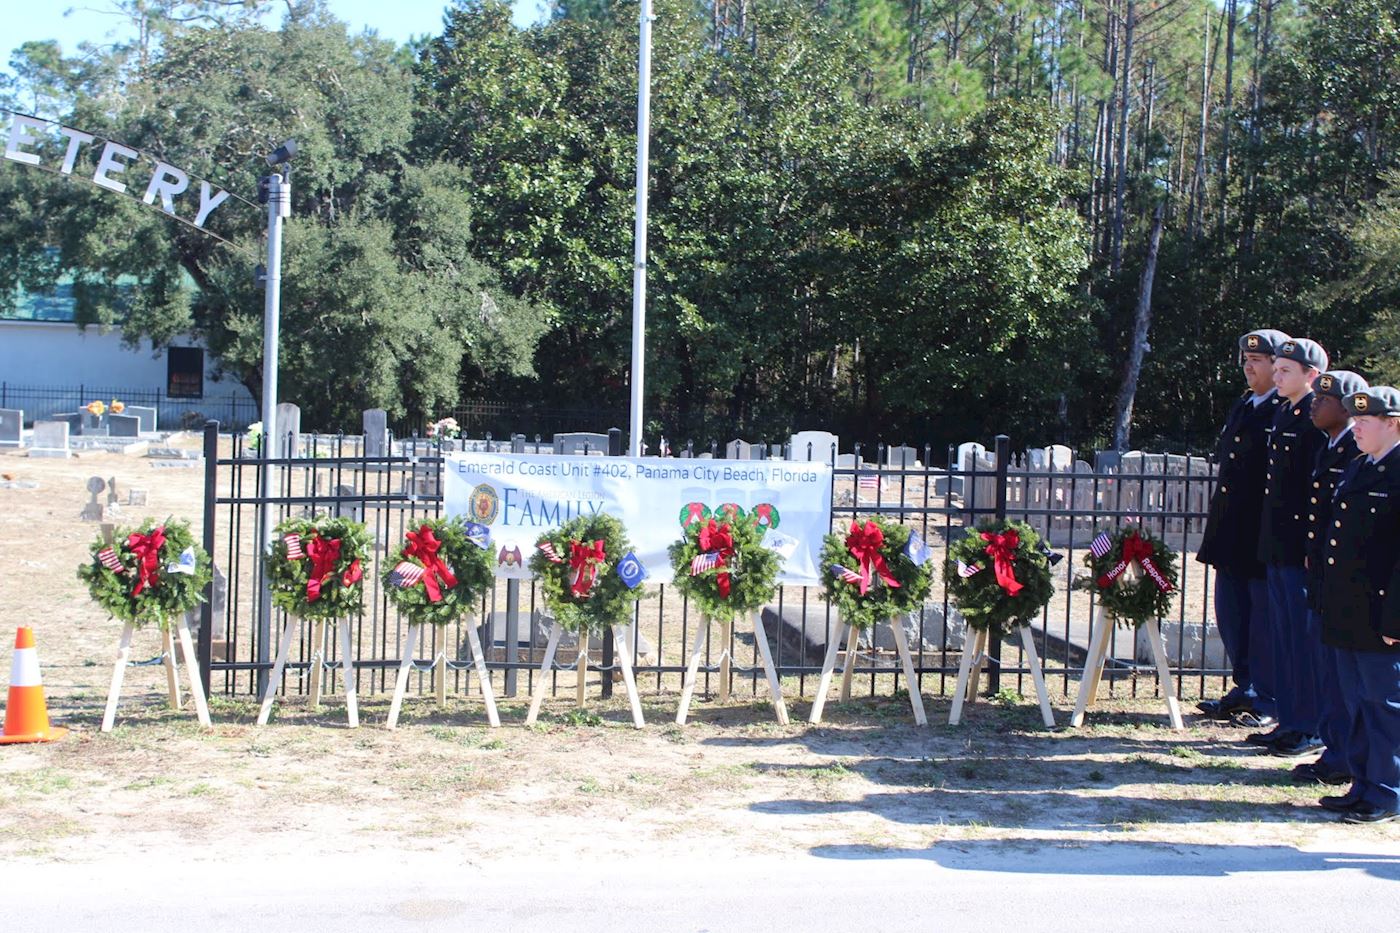 Wreaths representing all Service Branches & POW/MIA